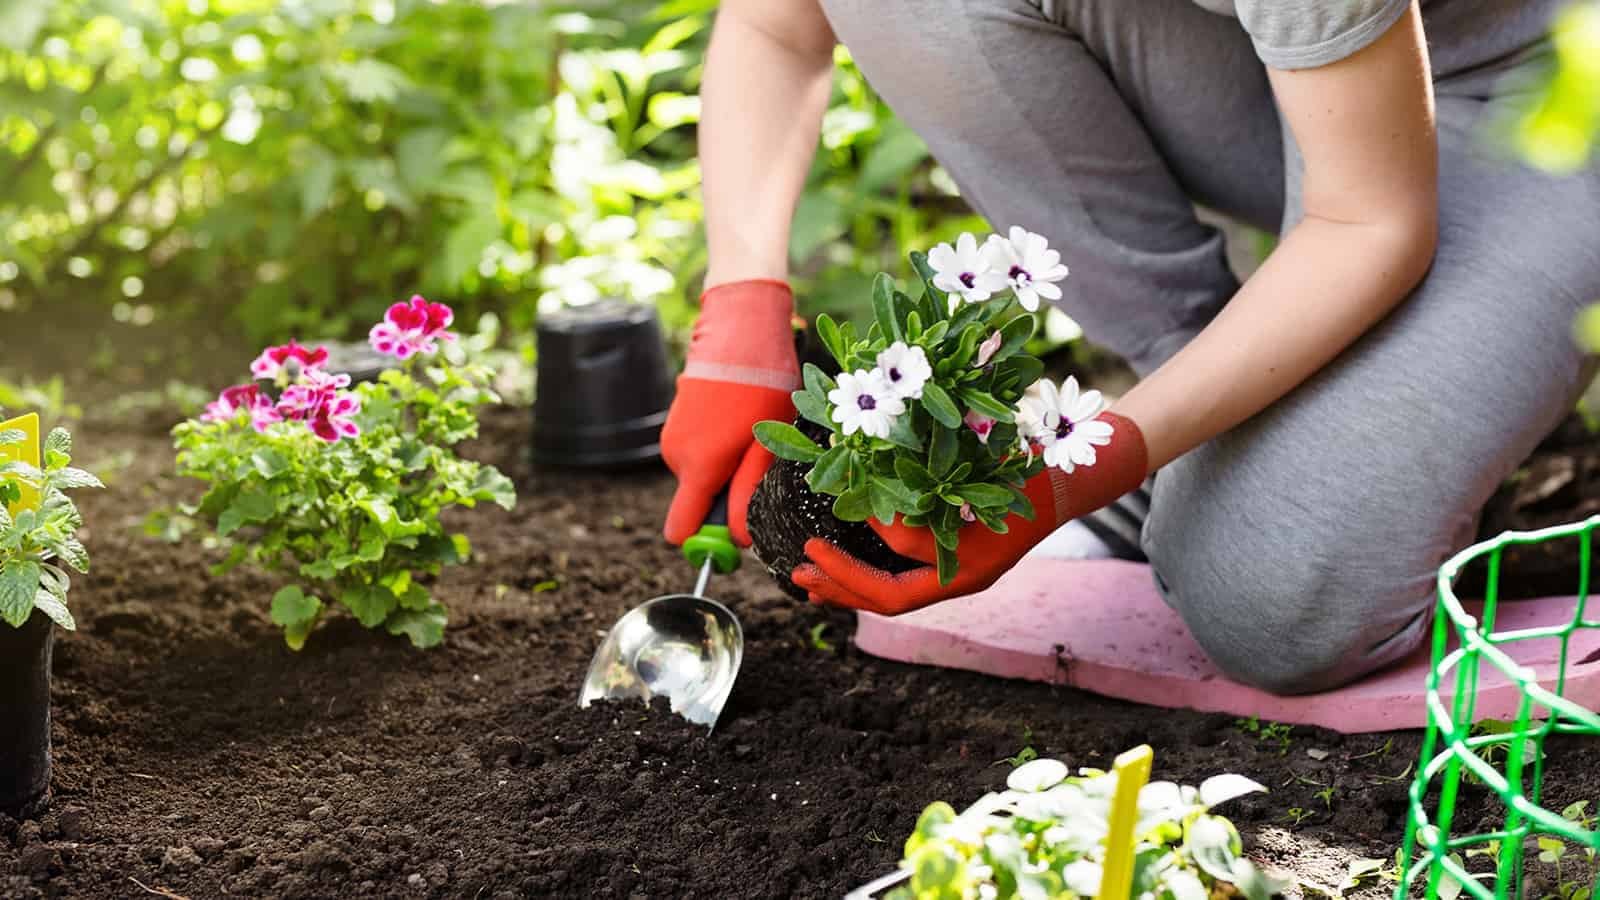 7 Ways Gardening Can Improve Your Health